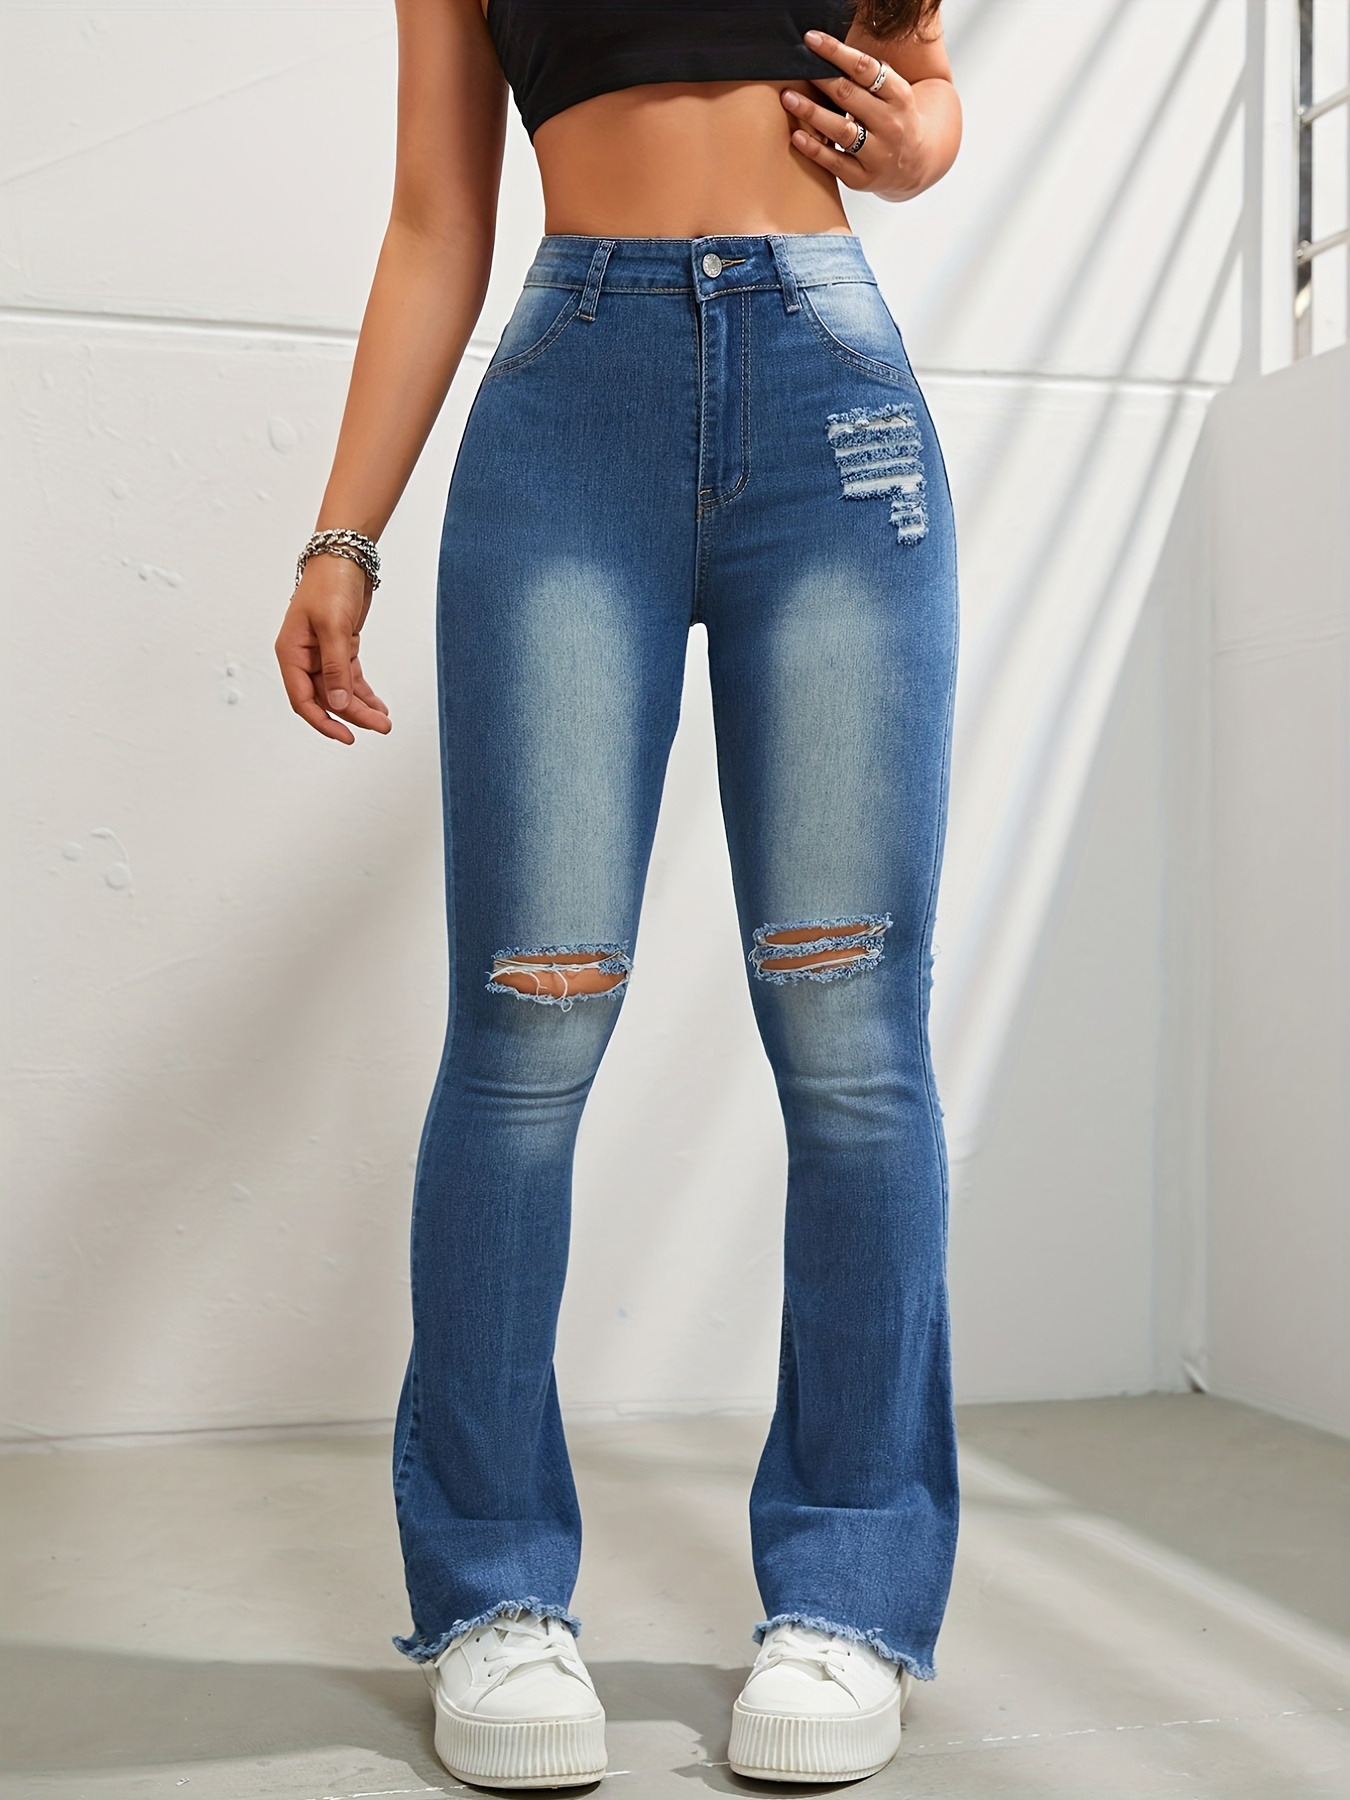 CuteCherry Bell Bottom Jeans for Women Ripped Distressed Flare